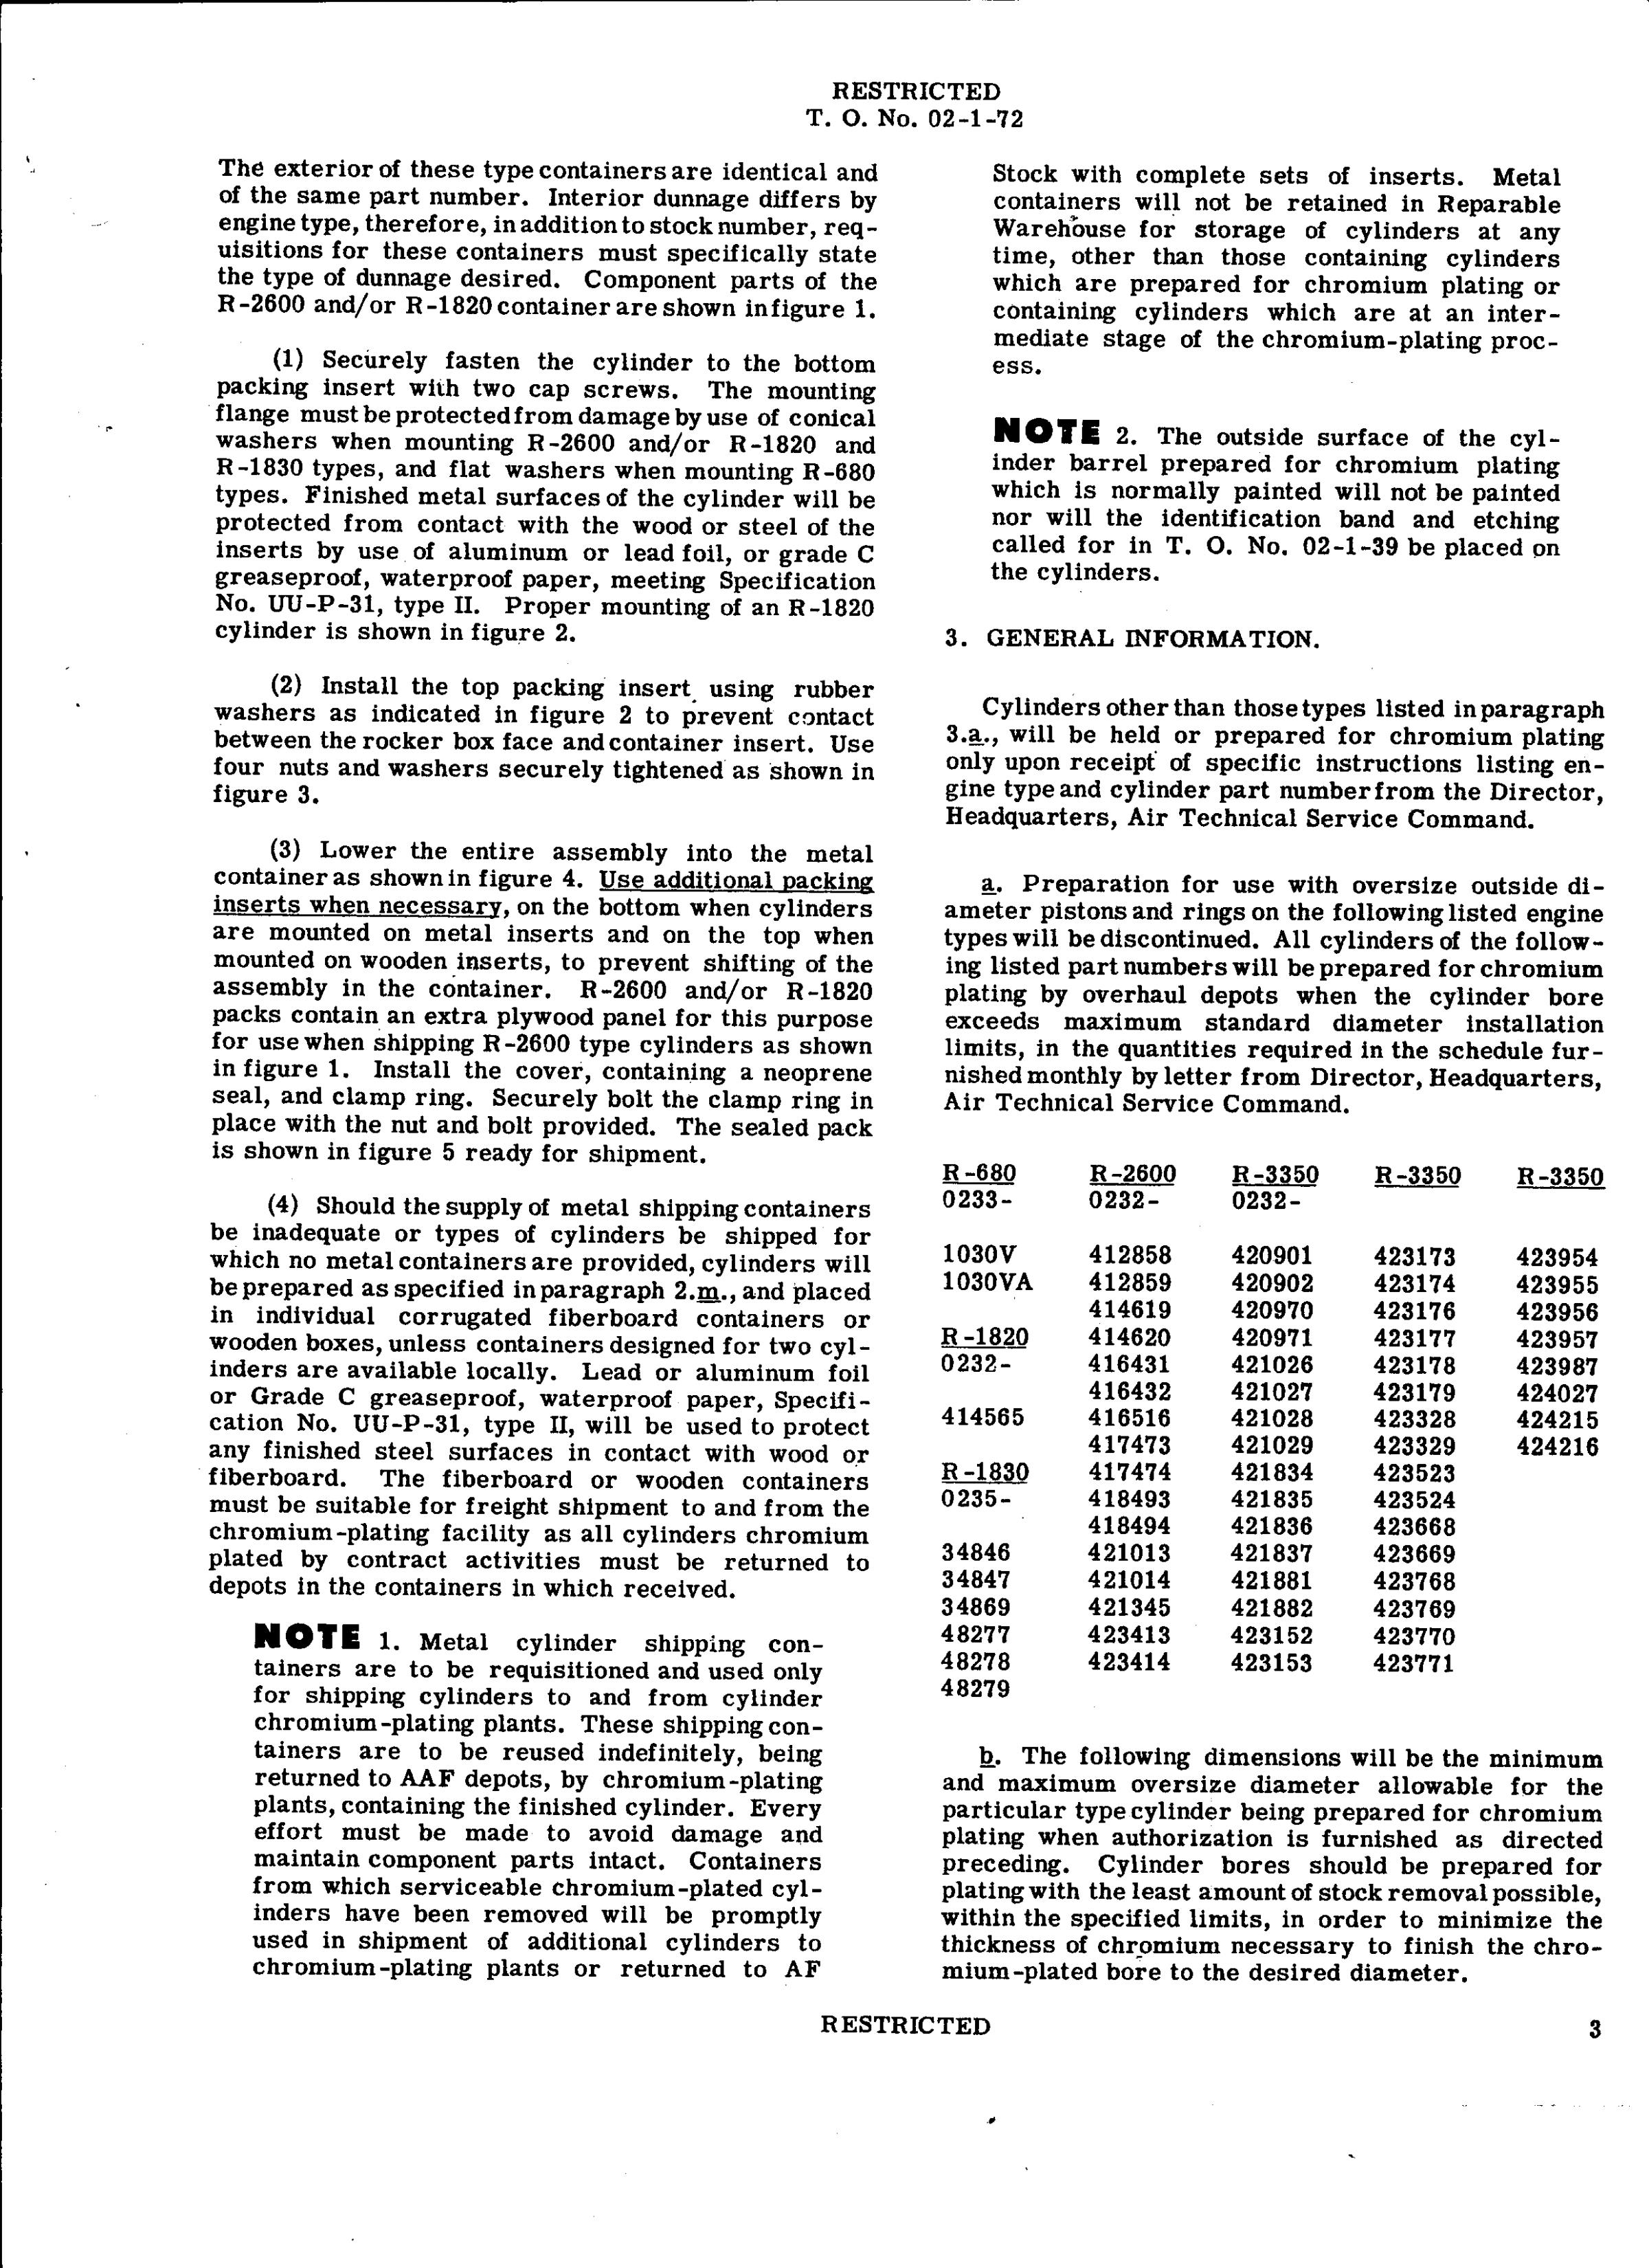 Sample page 3 from AirCorps Library document: Preparation of Aircraft Engine Cylinders for Chromium Plating